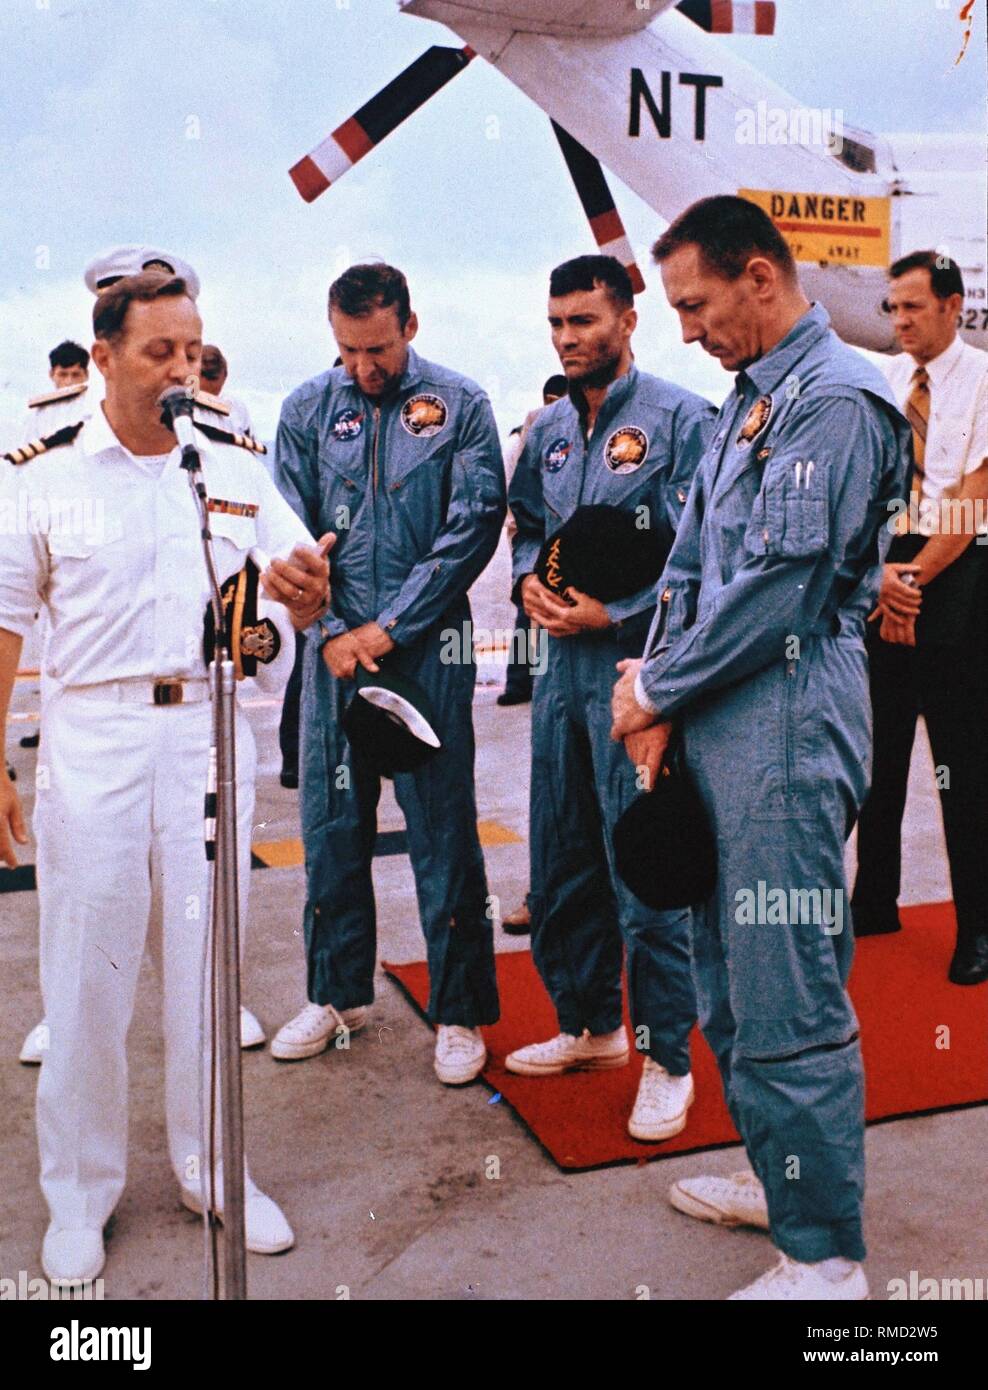 After the landing of Space Capsule 'Odyssey' in the Pacific, the astronauts of the Apollo 13 mission pray aboard the salvage ship, the USS Iwo Jima. Apollo 13 (11-17.04.1970), the third manned Moon landing mission, had to be interrupted exactly before the planned Moon landing due to an explosion in one of the oxygen tanks. After four days of a dramatic rescue operation, the three astronauts were brought back to Earth safely. Stock Photo